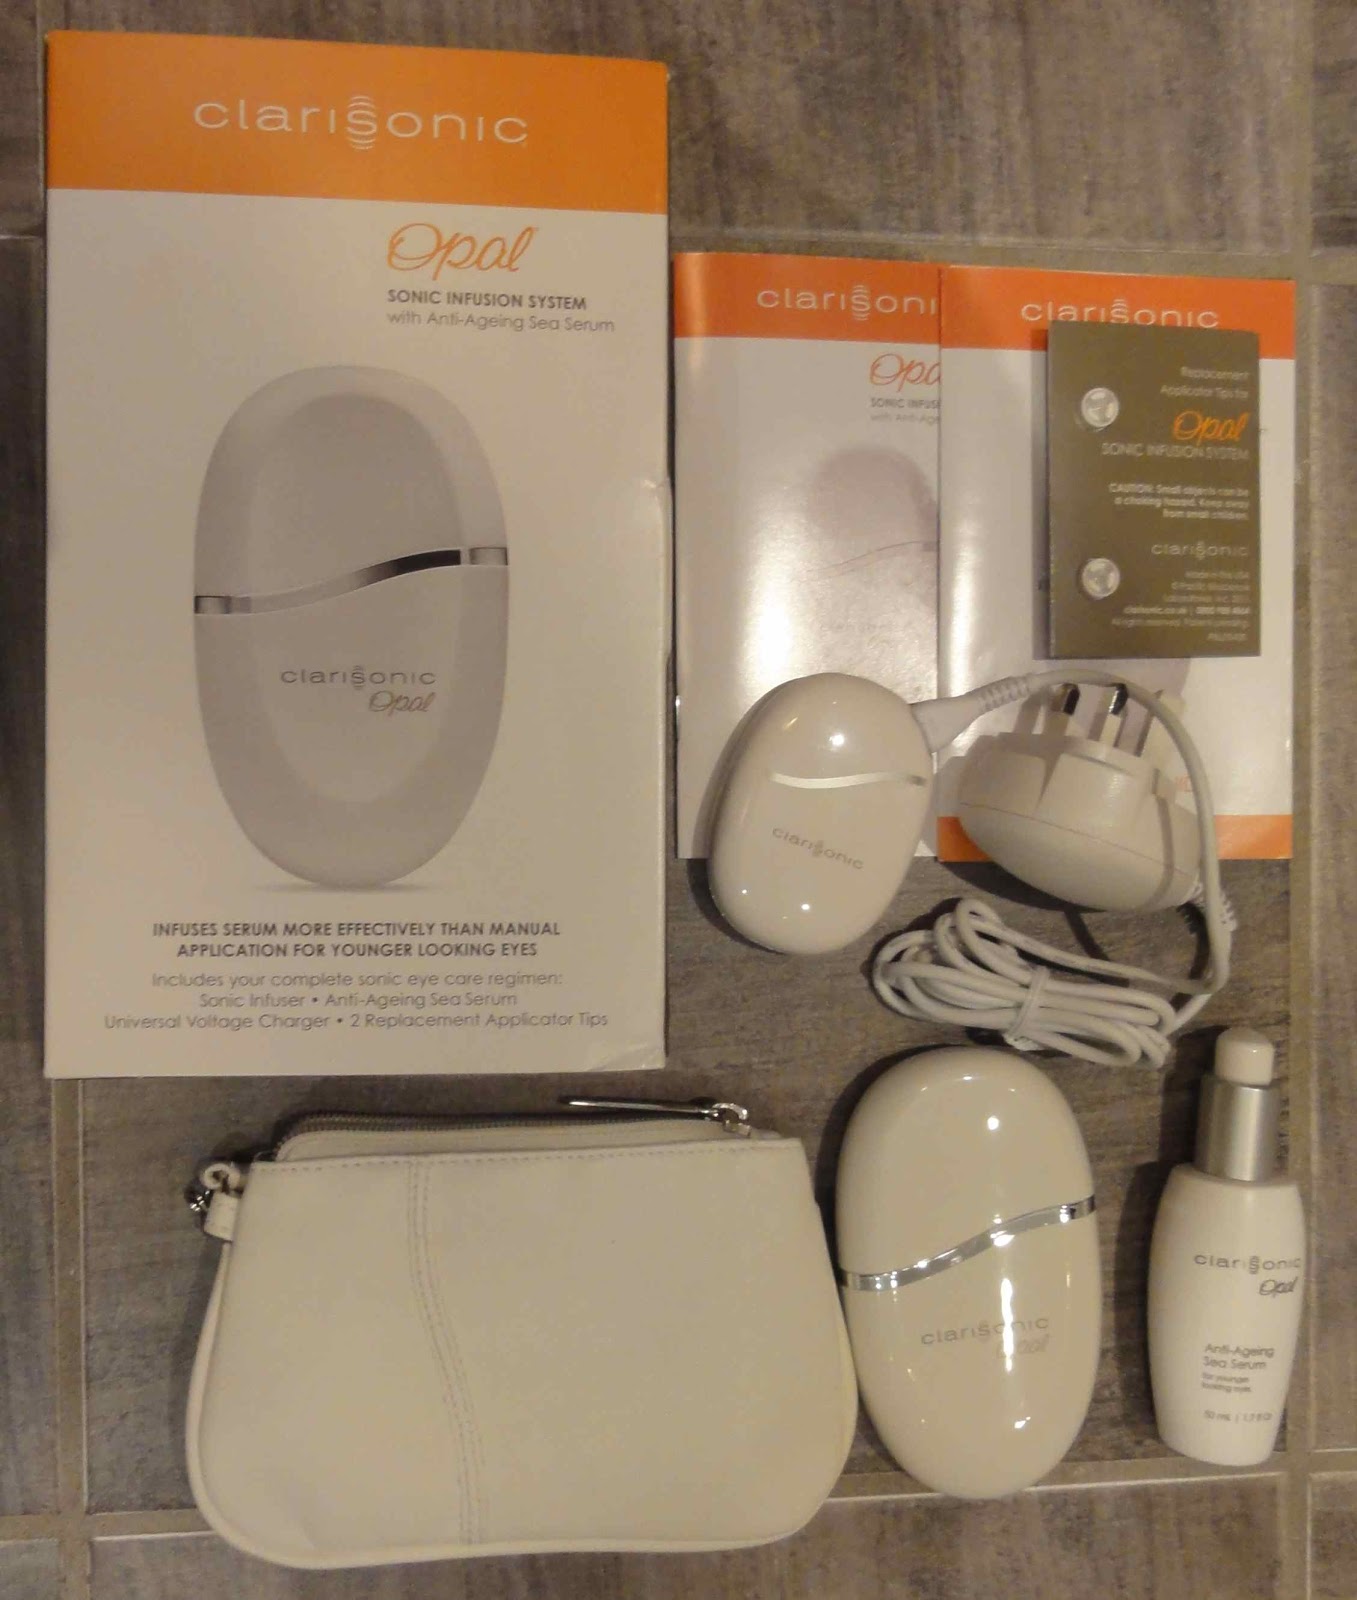 Opal Sonic Infusion System by Clarisonic Review & Giveaway! - The Mama Ash  Blog